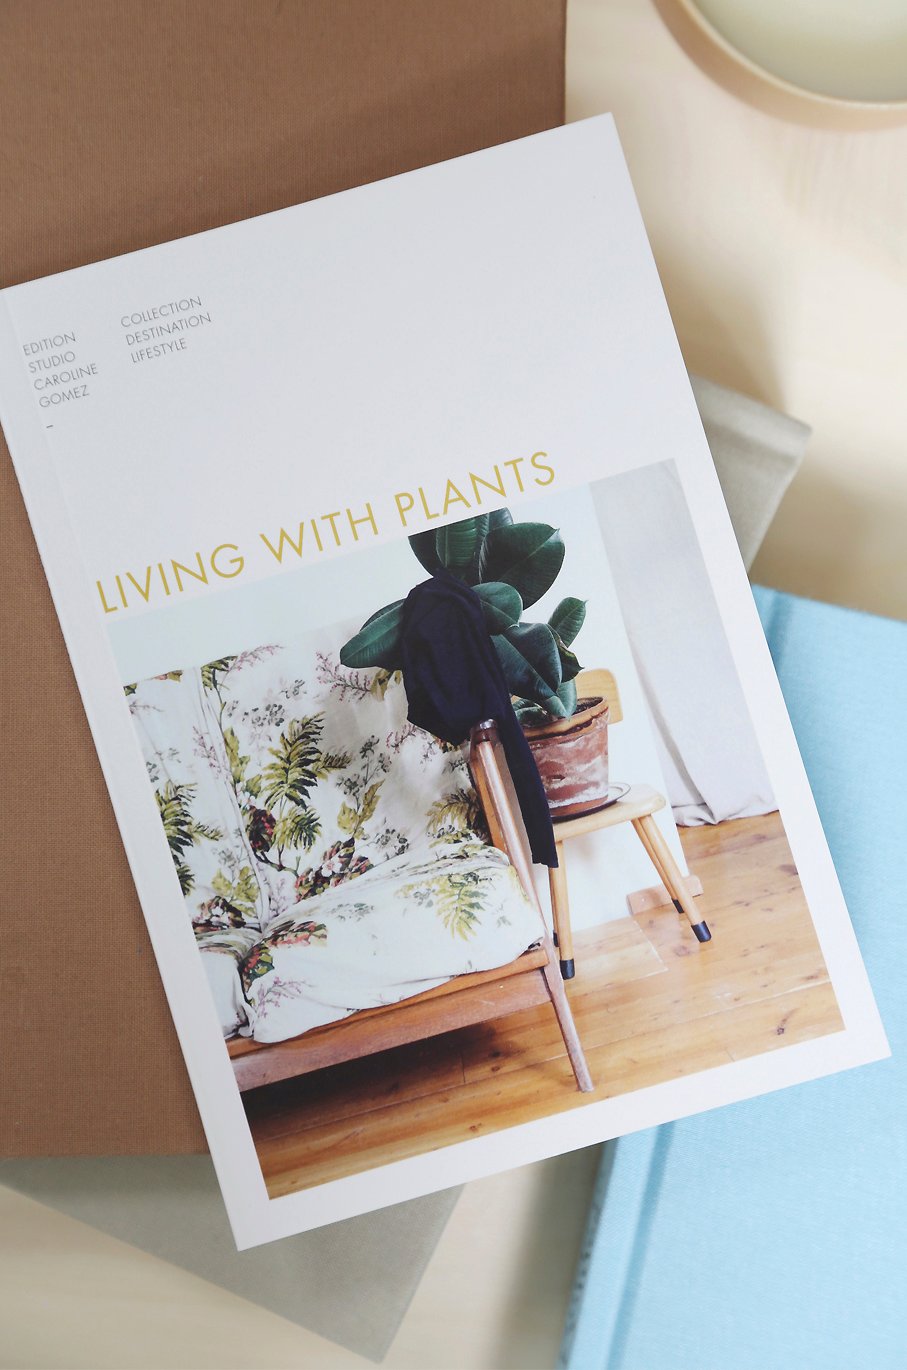 Image of Living with plants